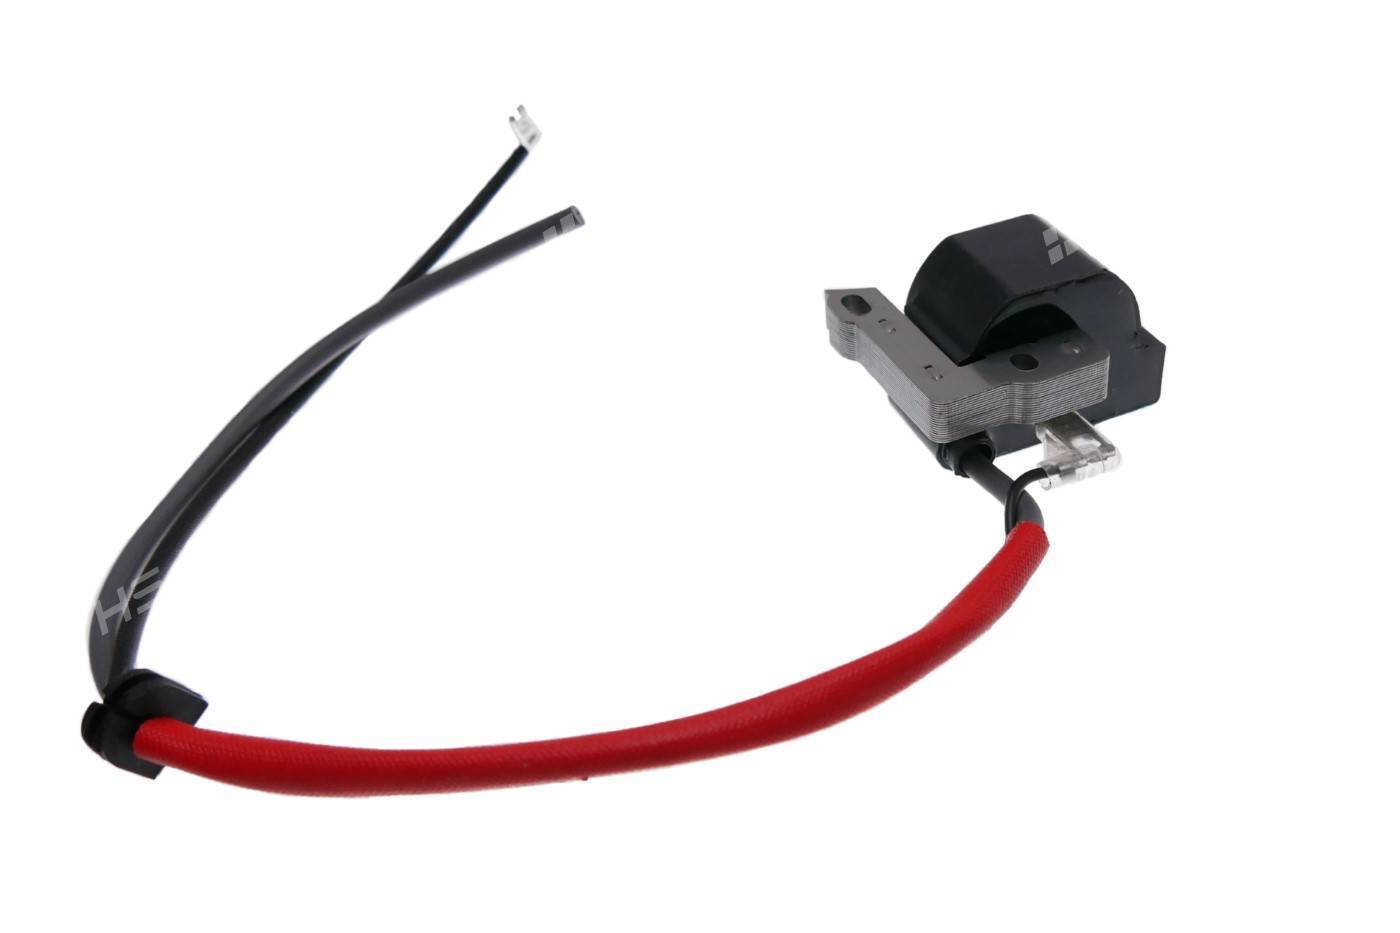 038143020 Replacement Ignition Coil For Dolmar PS-630 PS-6401 PS-7300 PS-7900 - $69.99